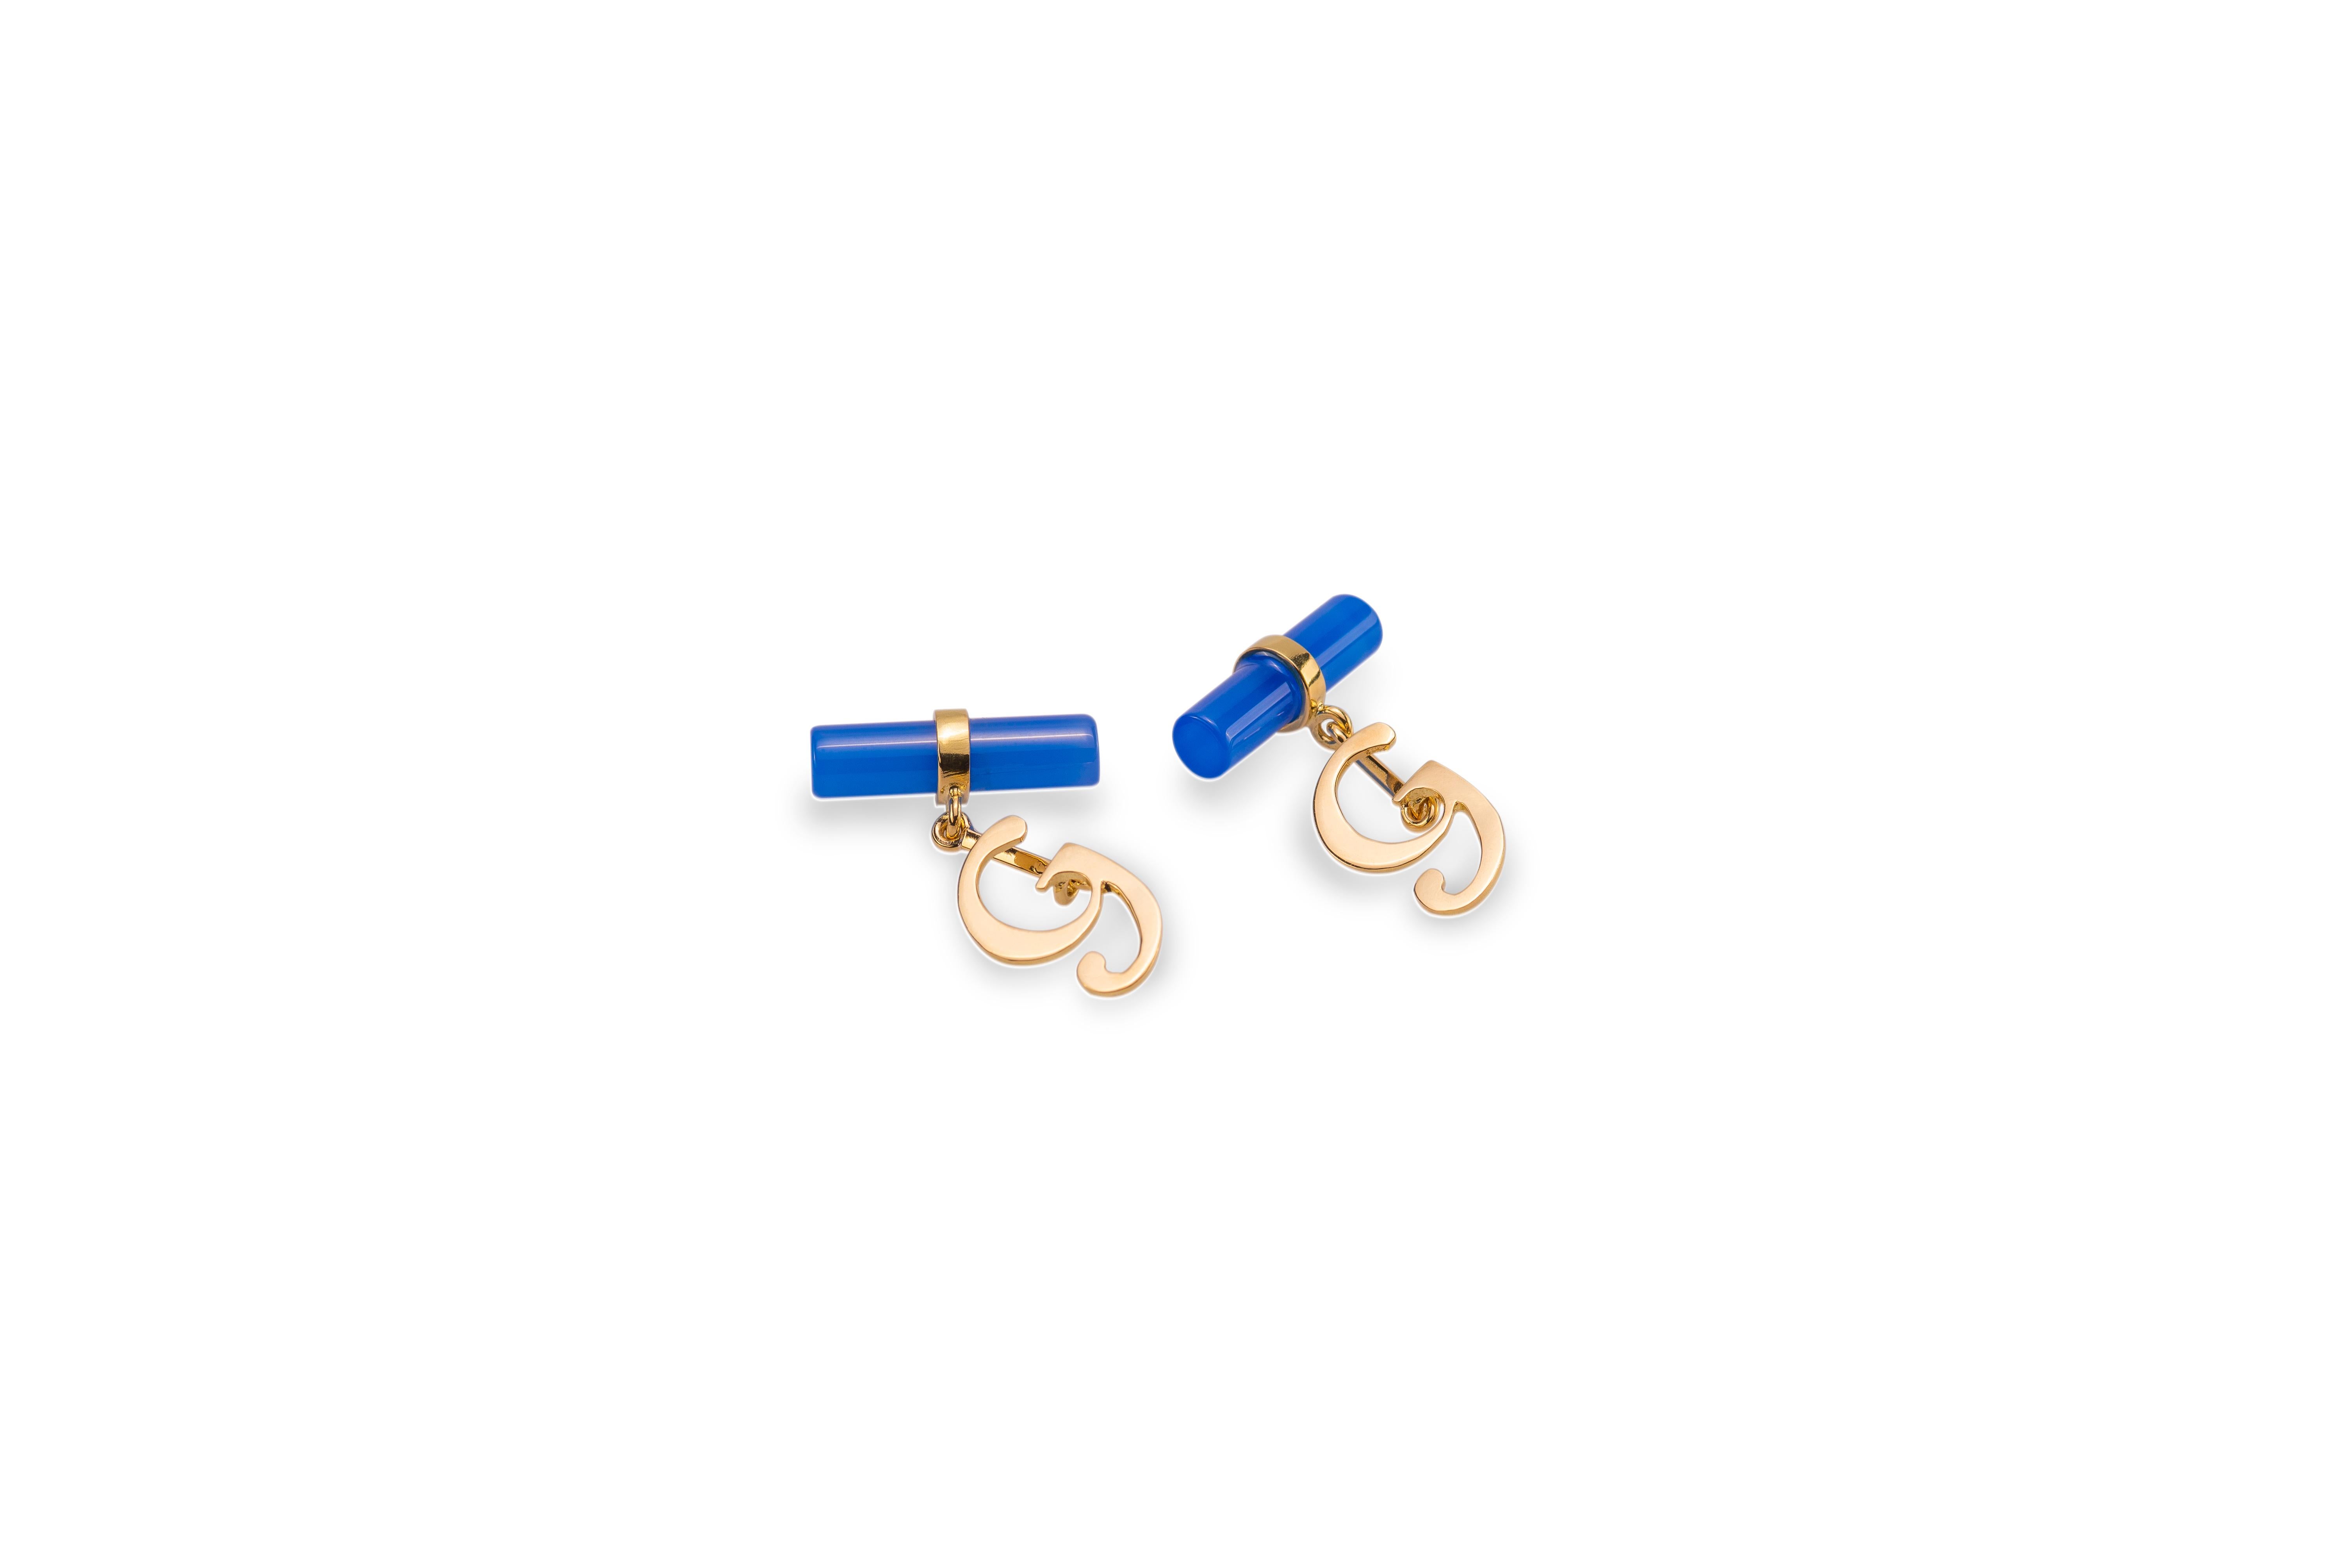  18 Karat Yellow Gold Blue Agate Letter & Initial Customizable Unisex Cufflinks
These nice cufflinks are made with a deep blue agate bar. The letter 